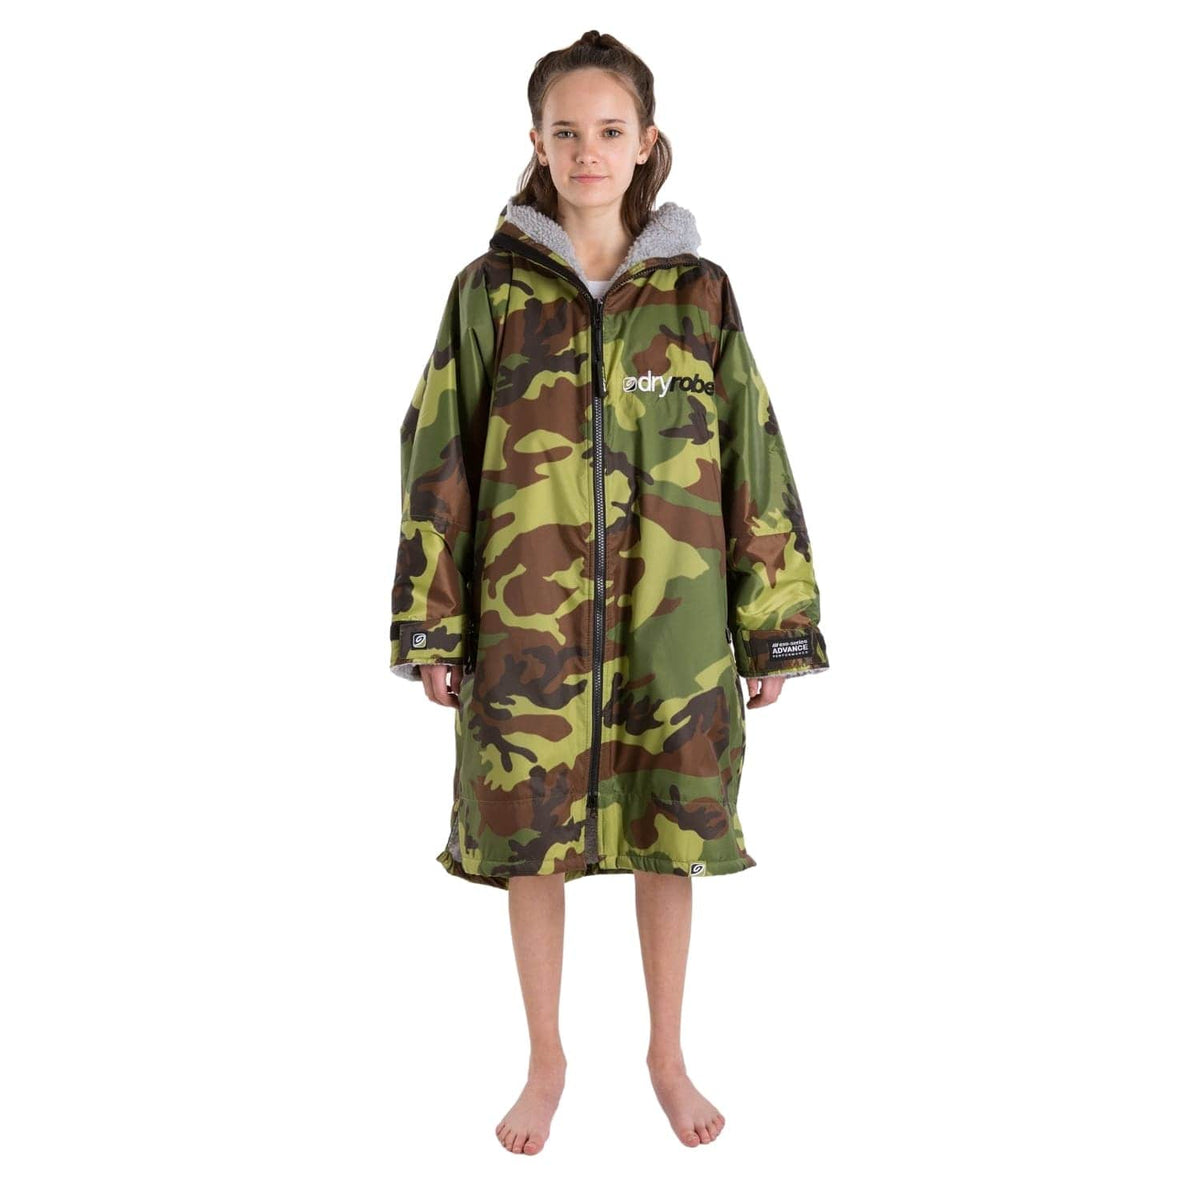 Dryrobe Kids Advance Long Sleeve Drying &amp; Changing Robe - Camouflage/Grey - Changing Robe Poncho Towel by Dryrobe 10-14 Years